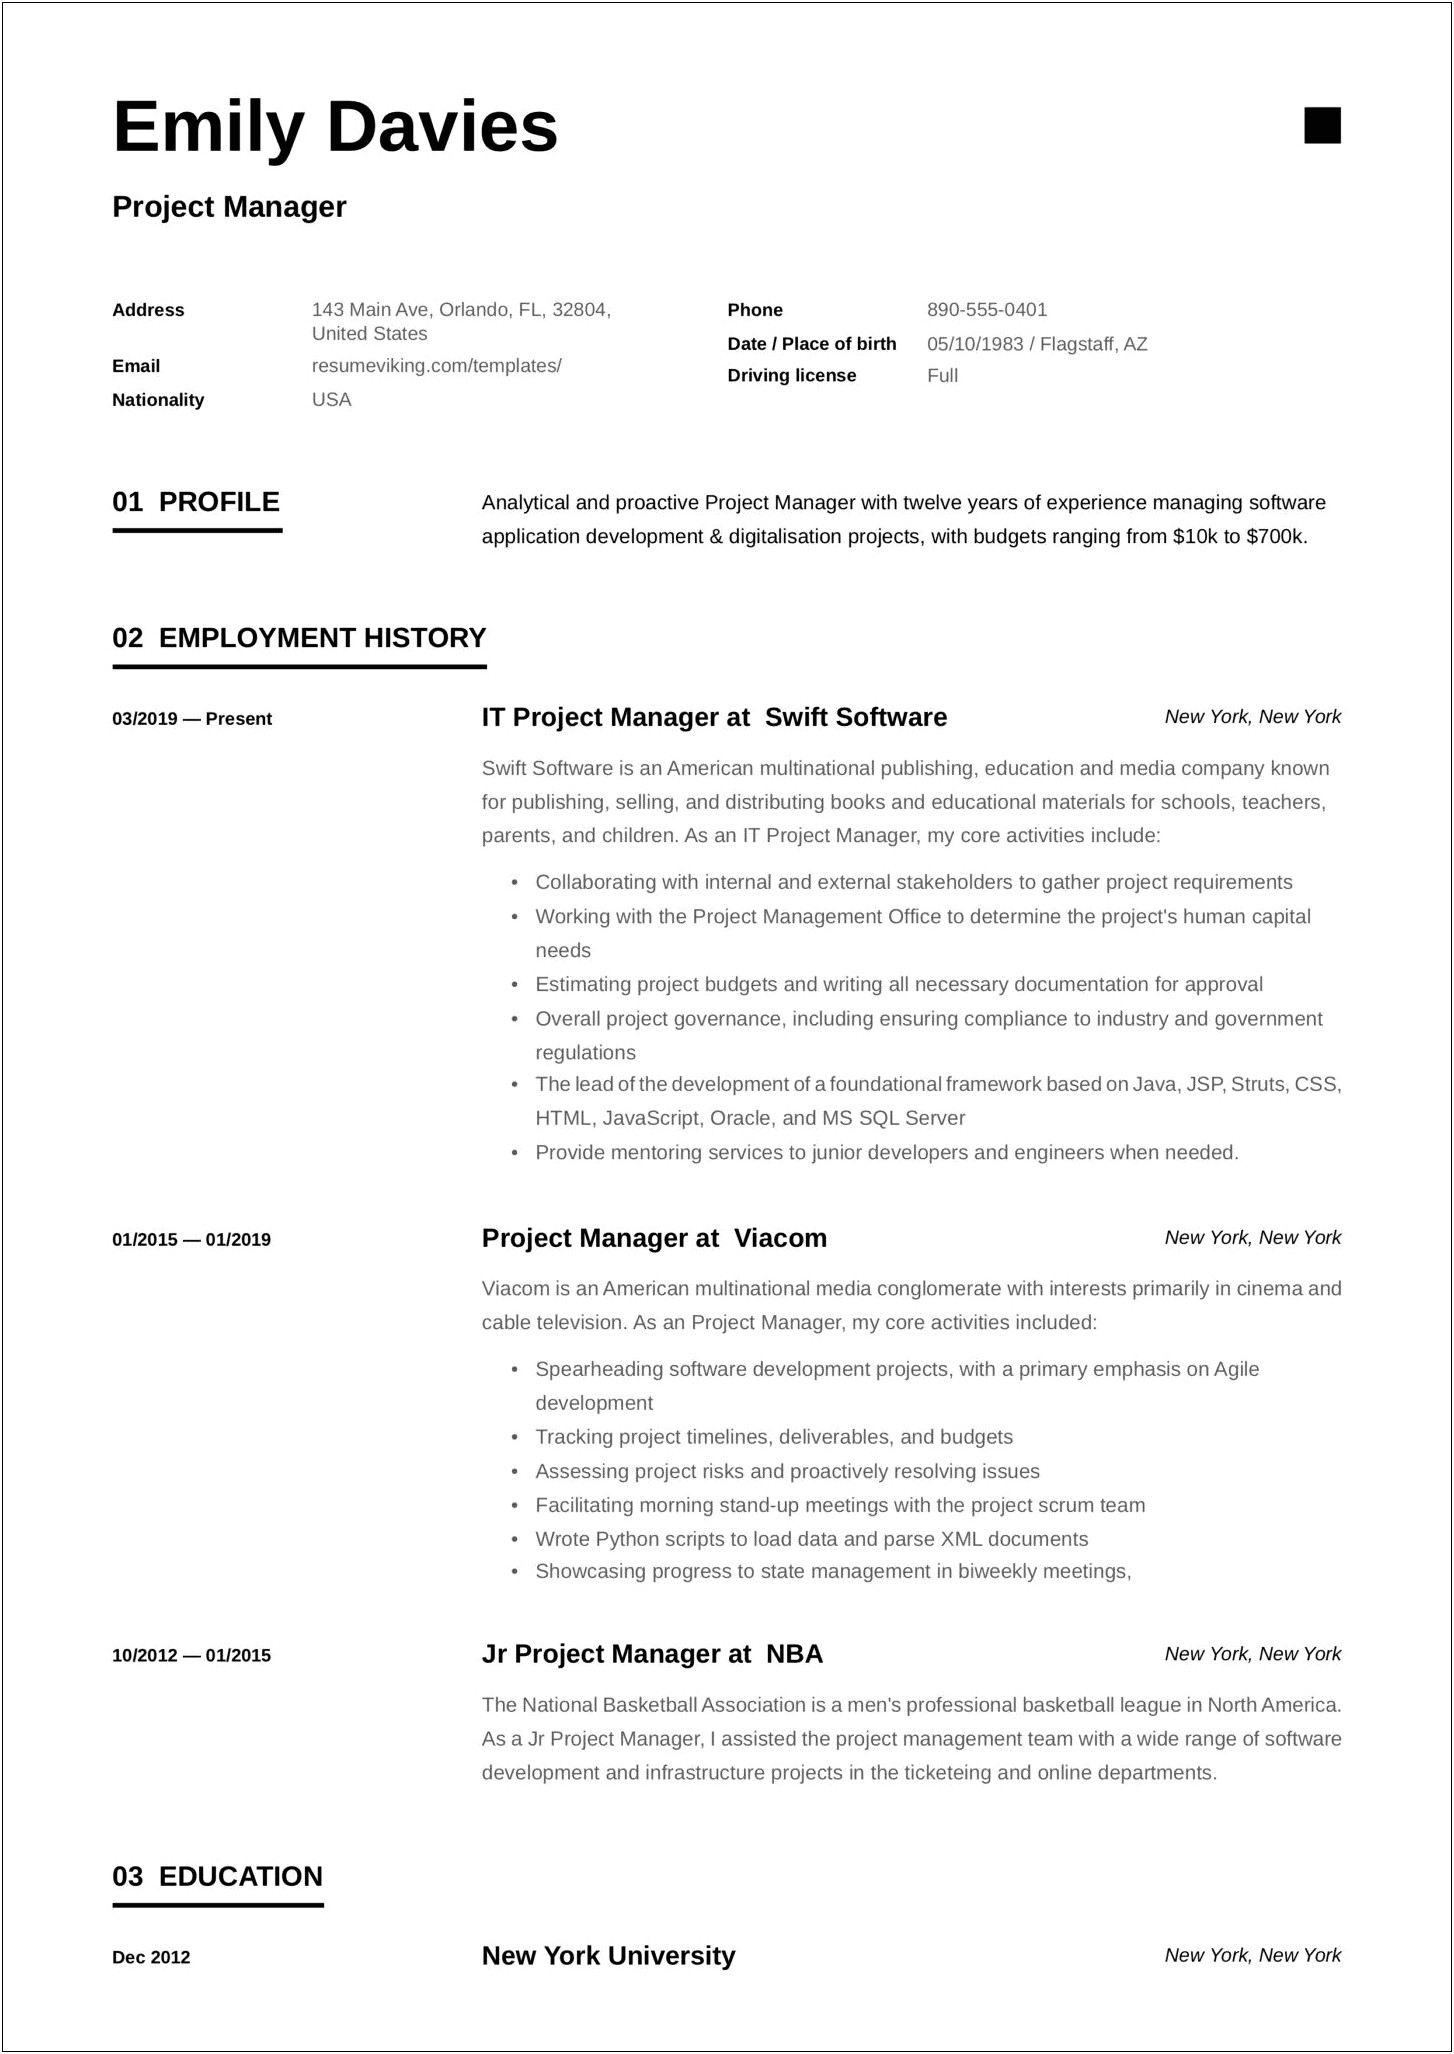 Entry Level Project Manager Resume Summary